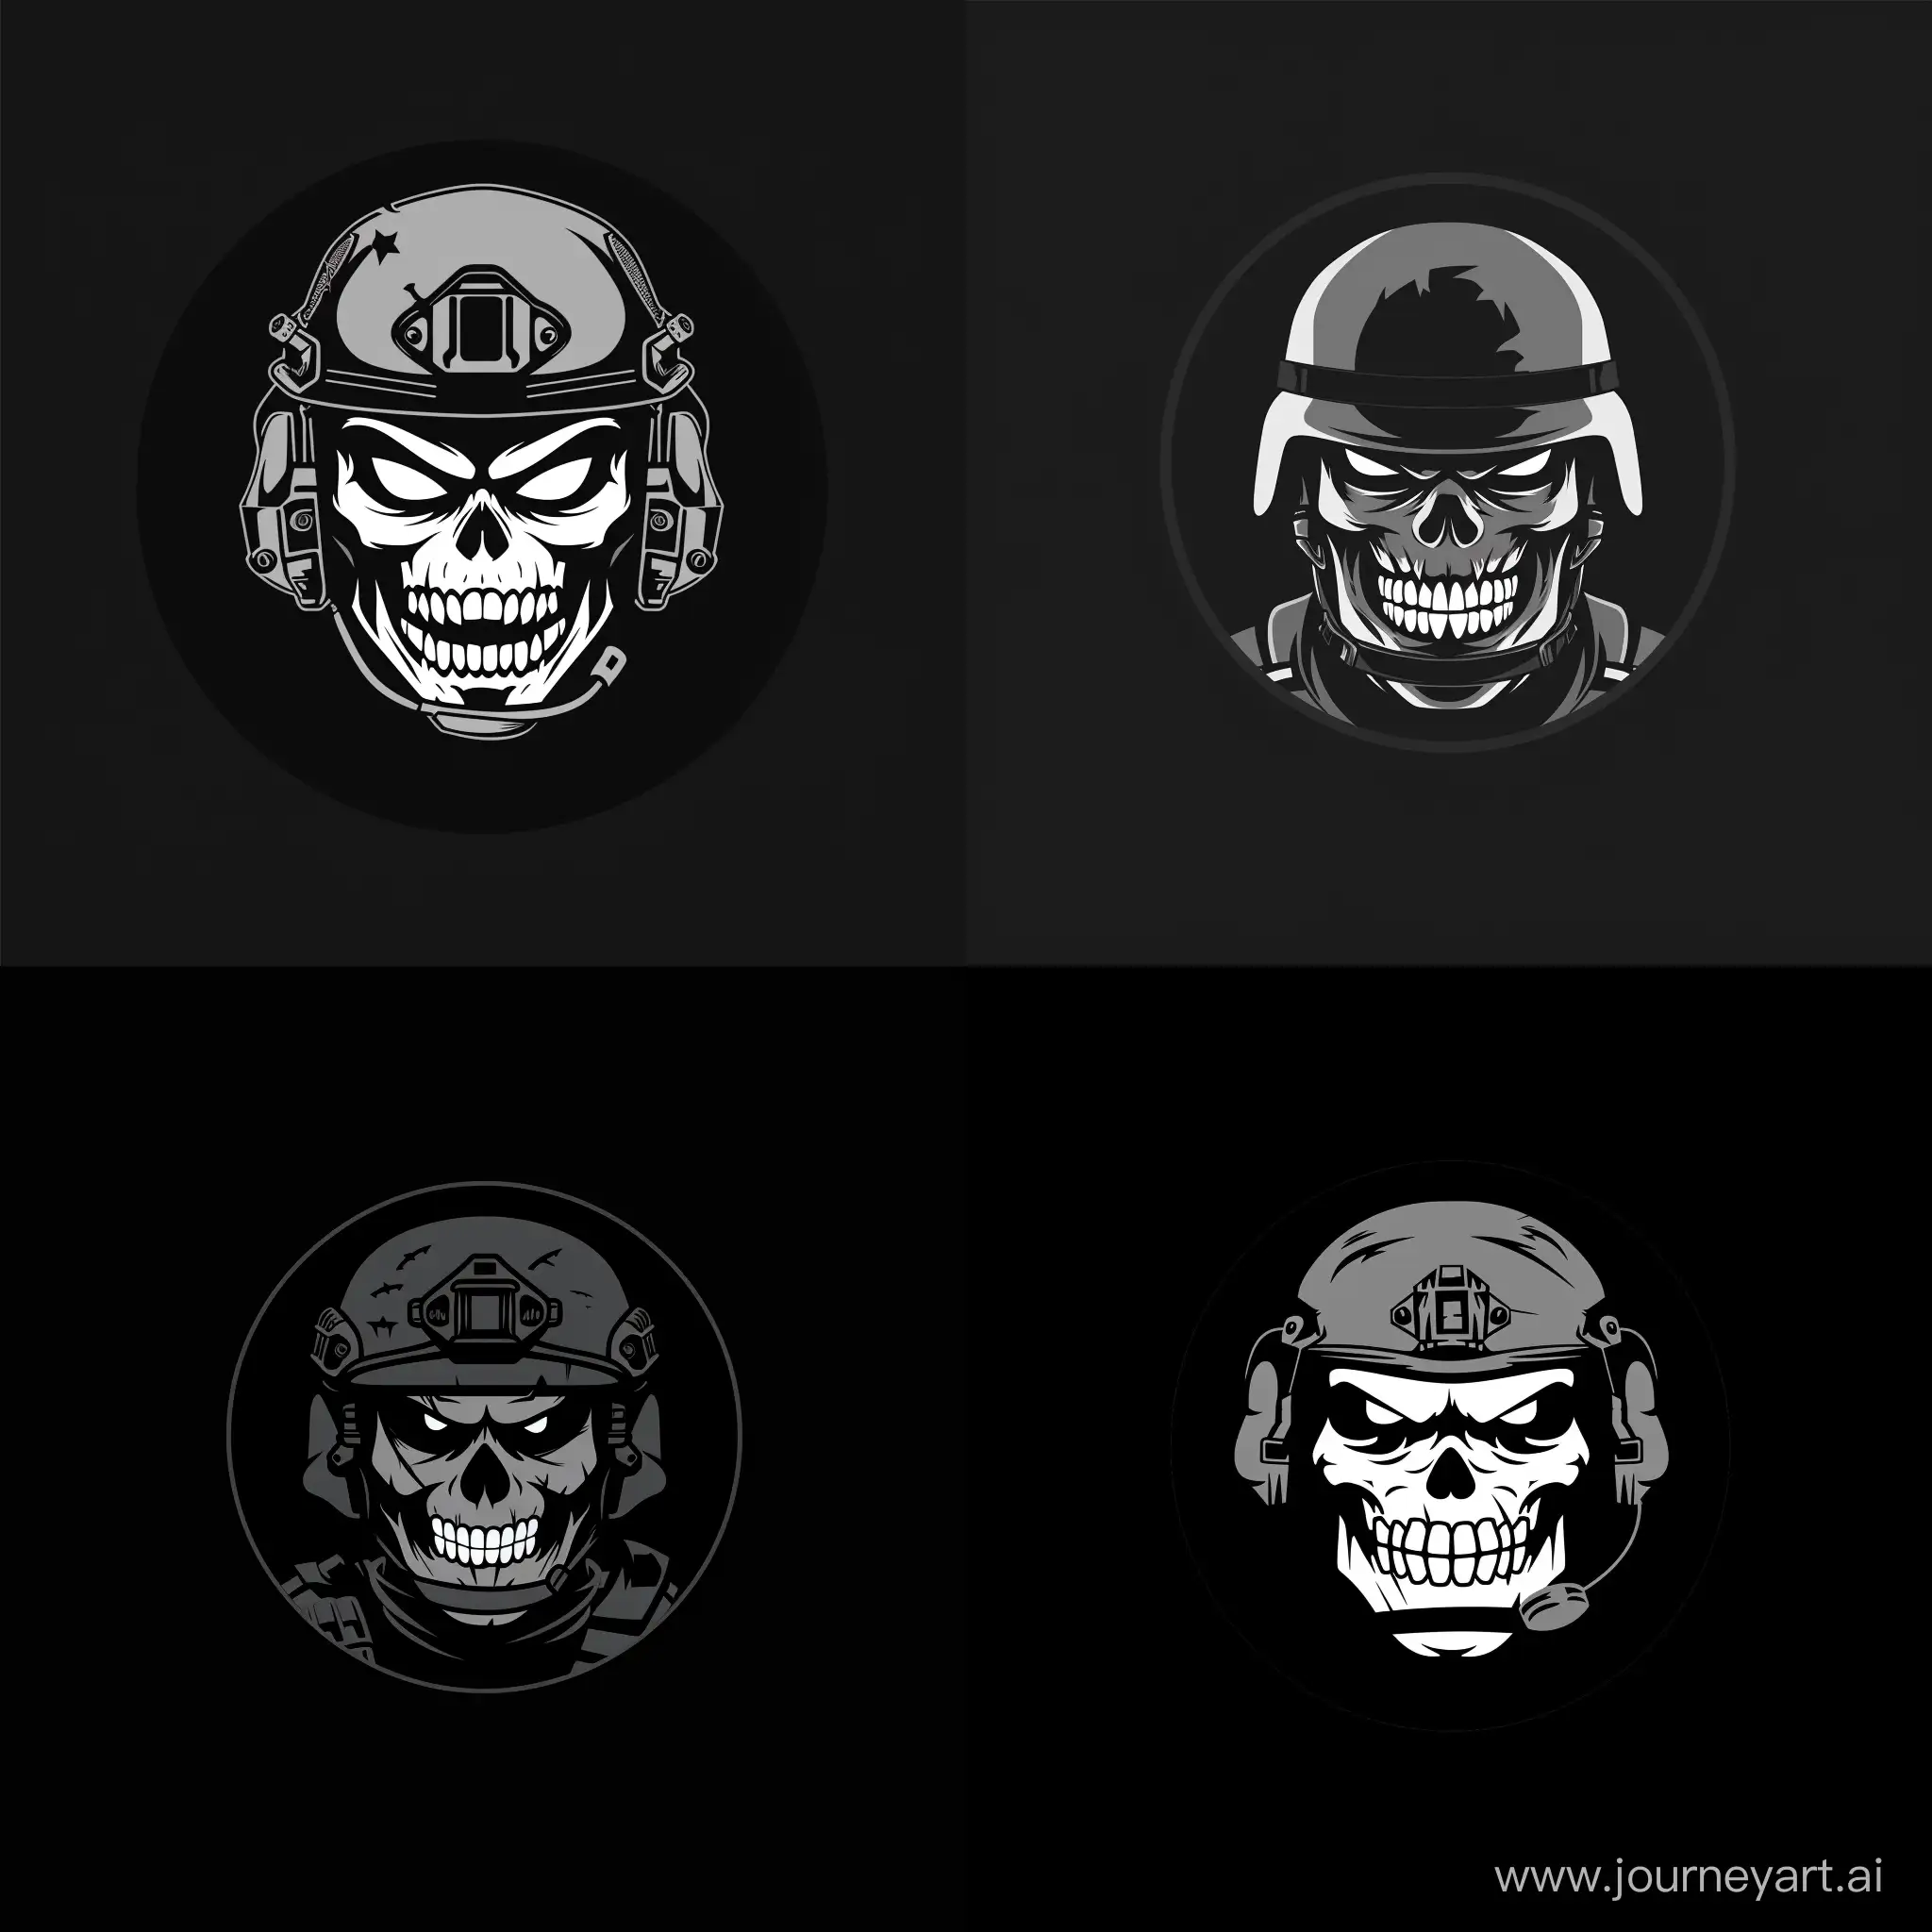 Modern-Military-Madness-Angry-Smile-and-Skull-Mask-on-Black-Background